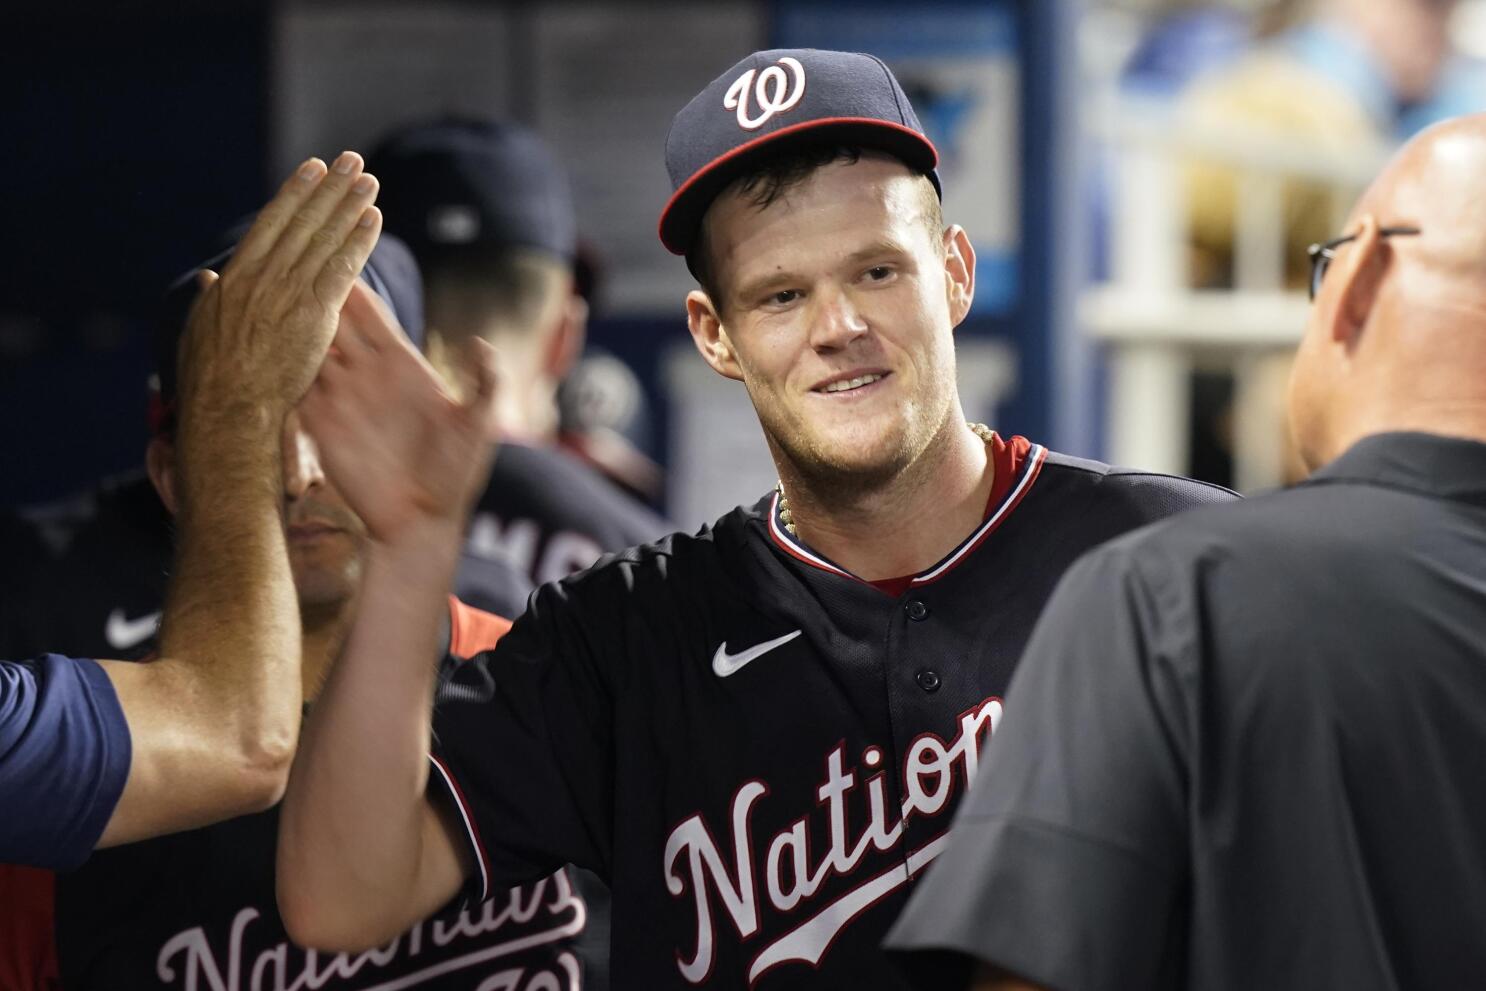 Josh Rogers allows 1 run to lead Nationals over Marlins 7-1